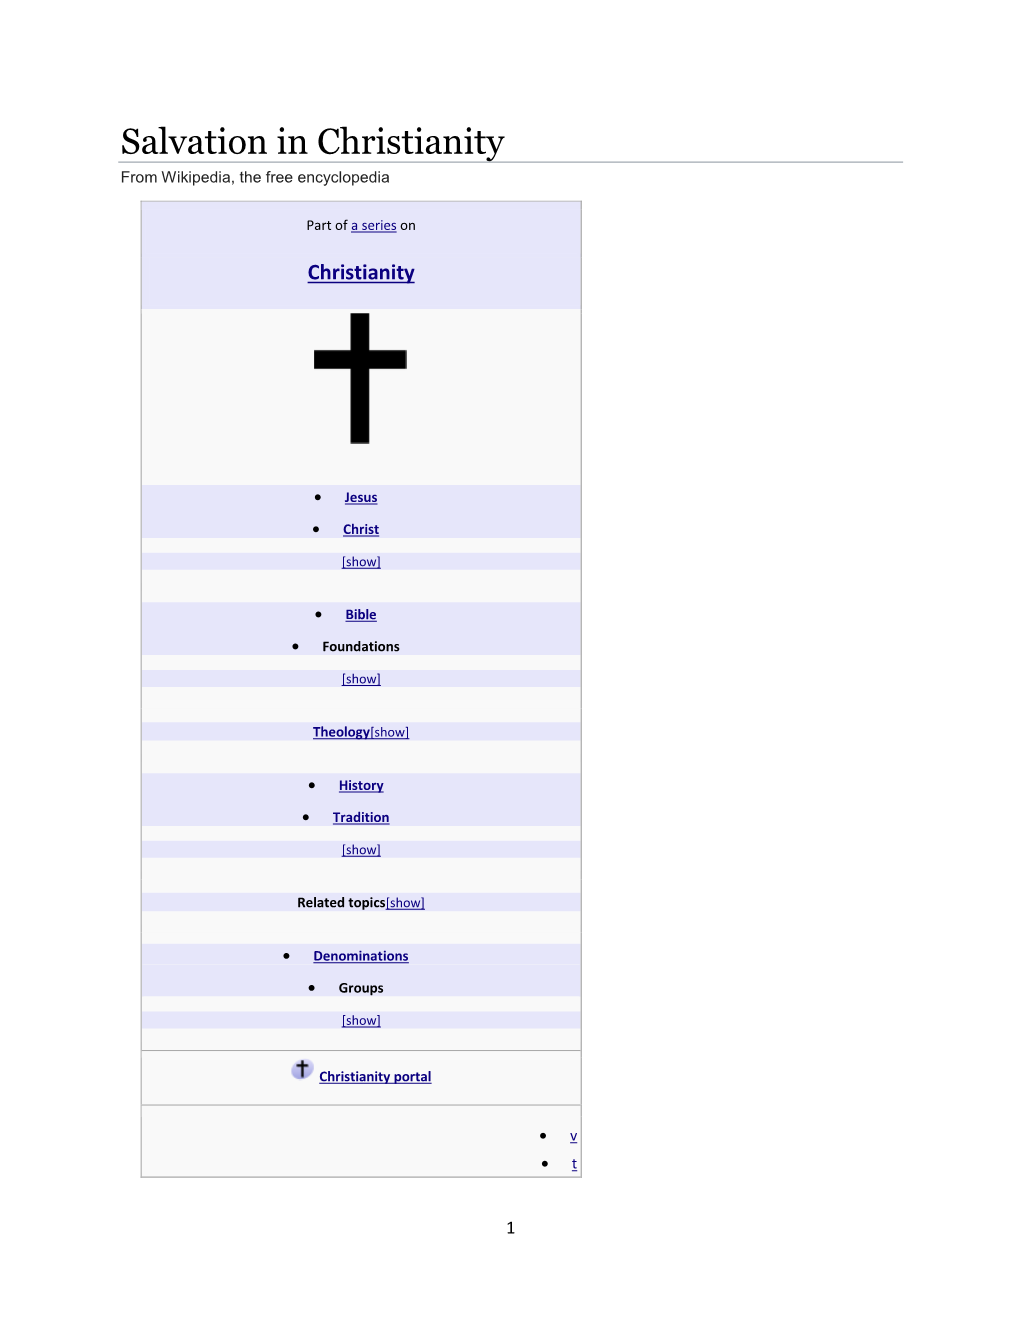 Salvation in Christianity from Wikipedia, the Free Encyclopedia